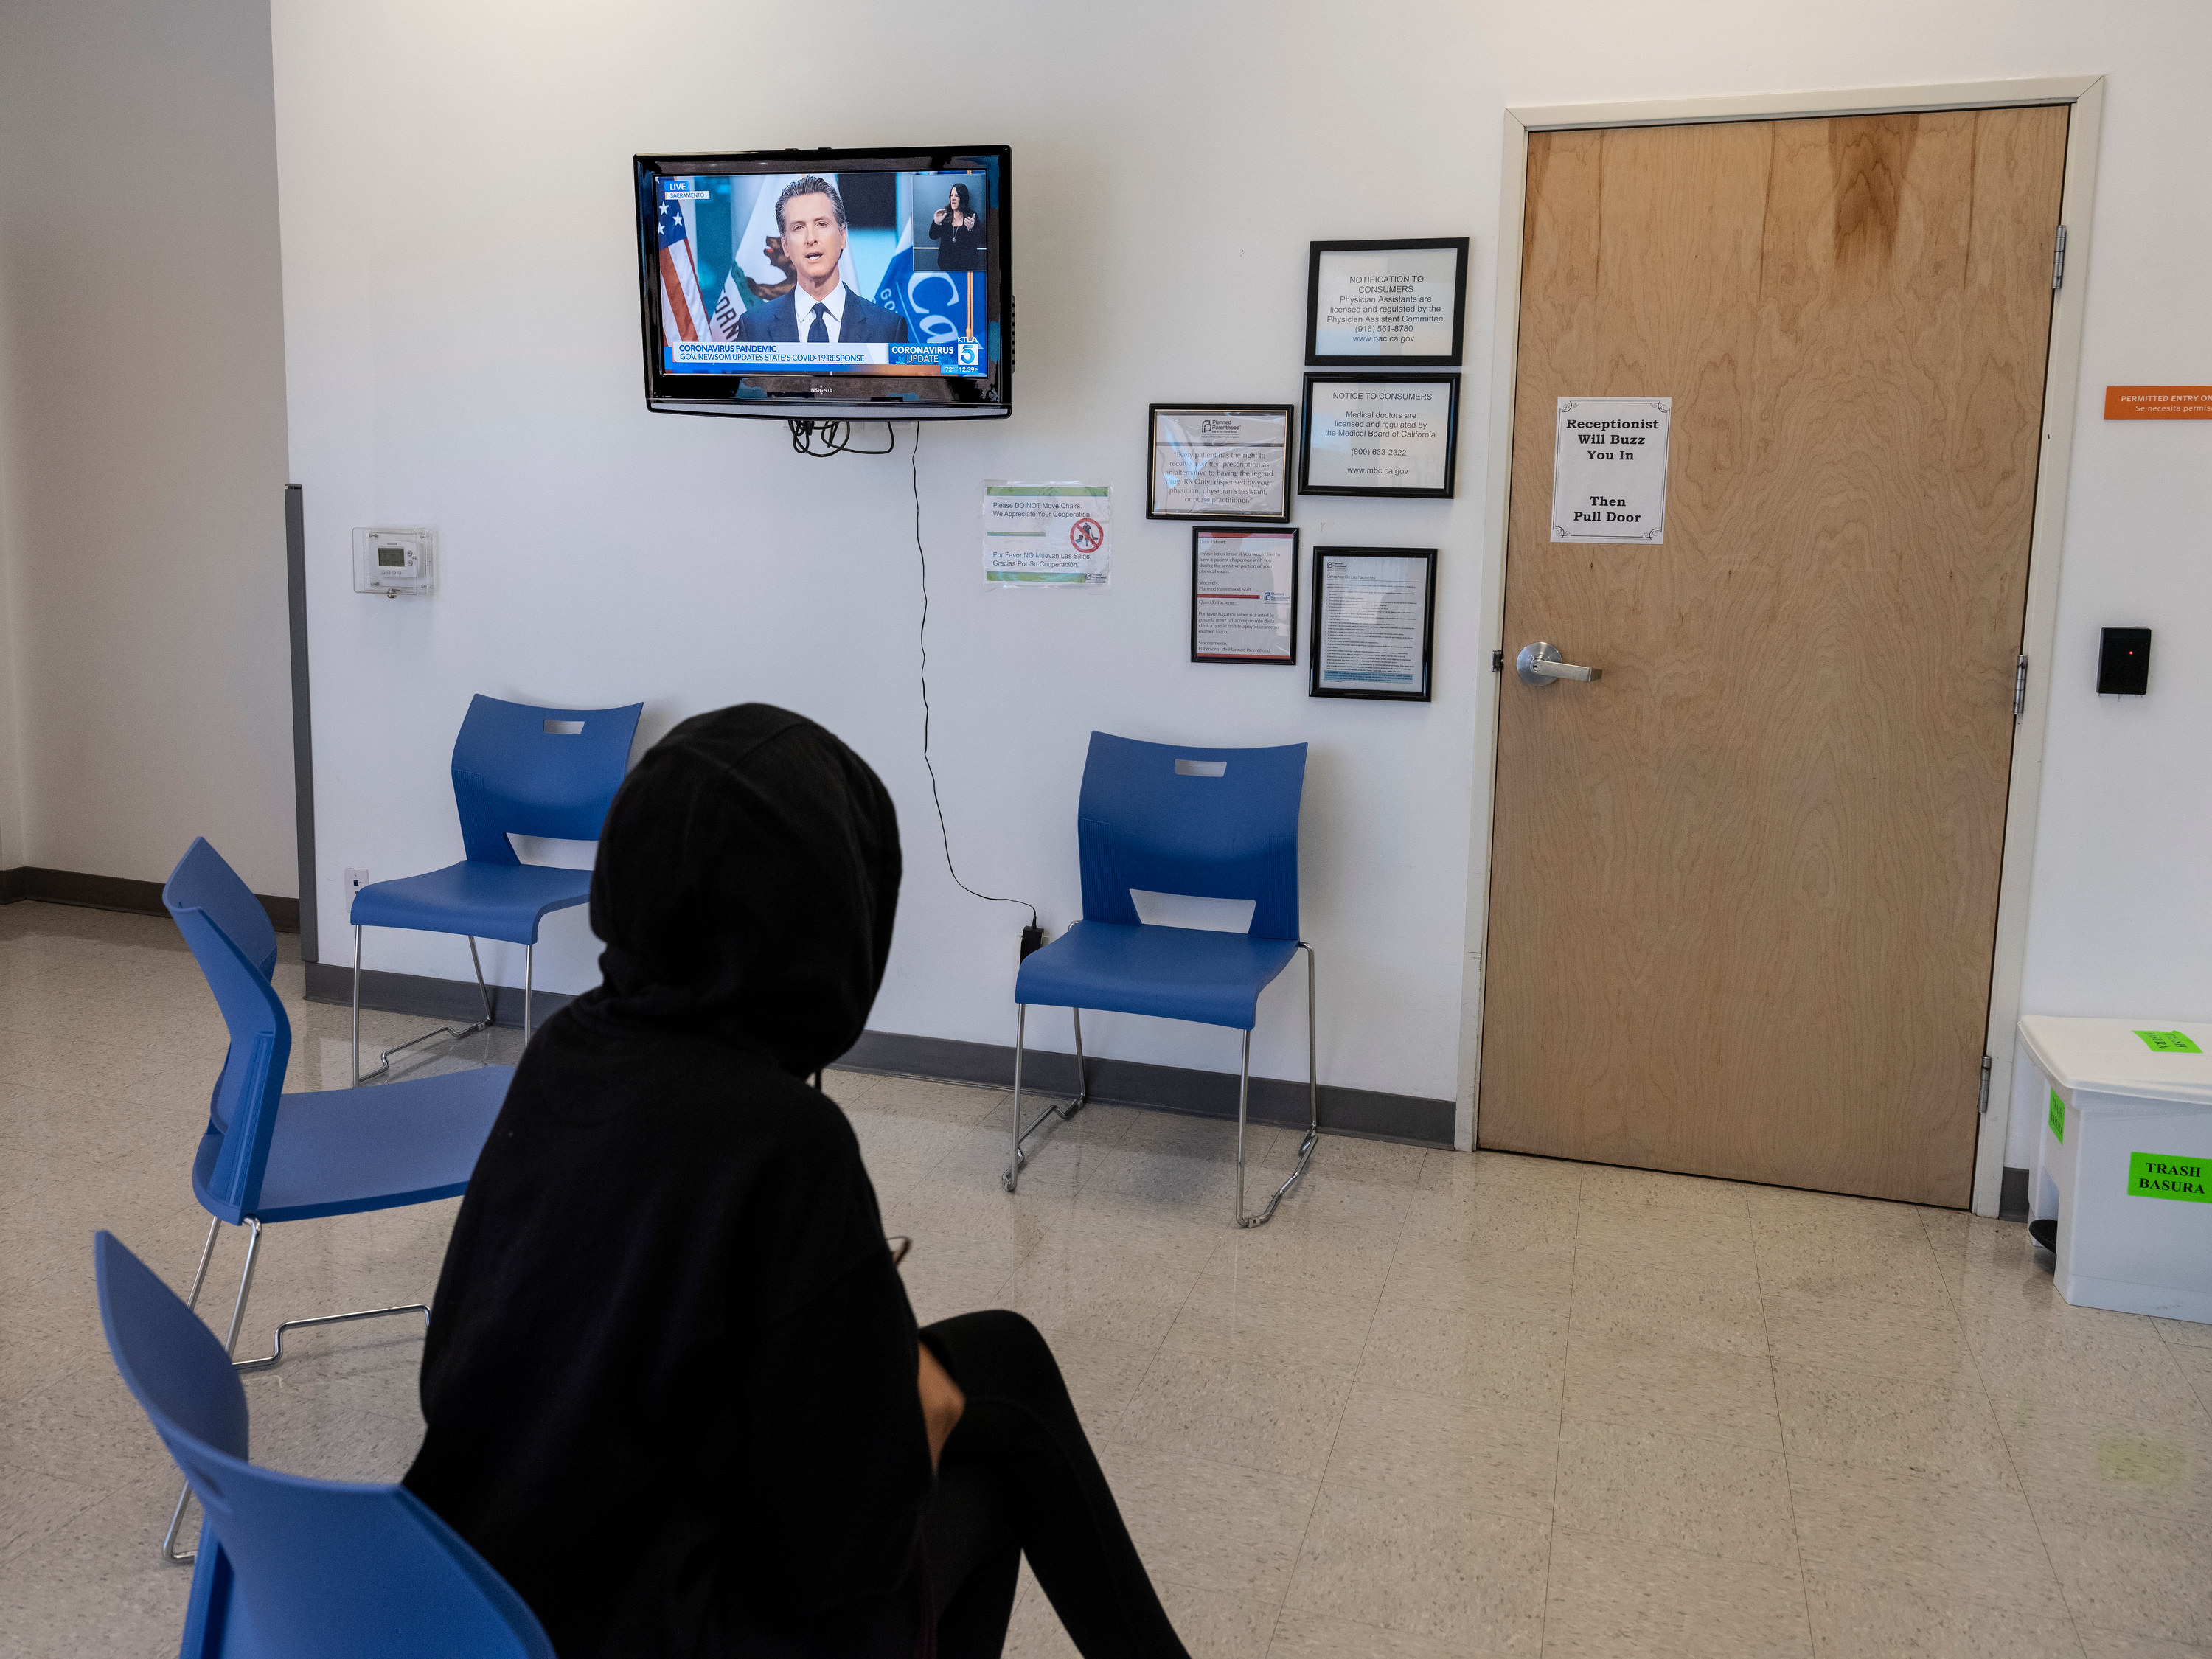 A figure in a hoodie sits in a waiting room where a TV is showing news coverage